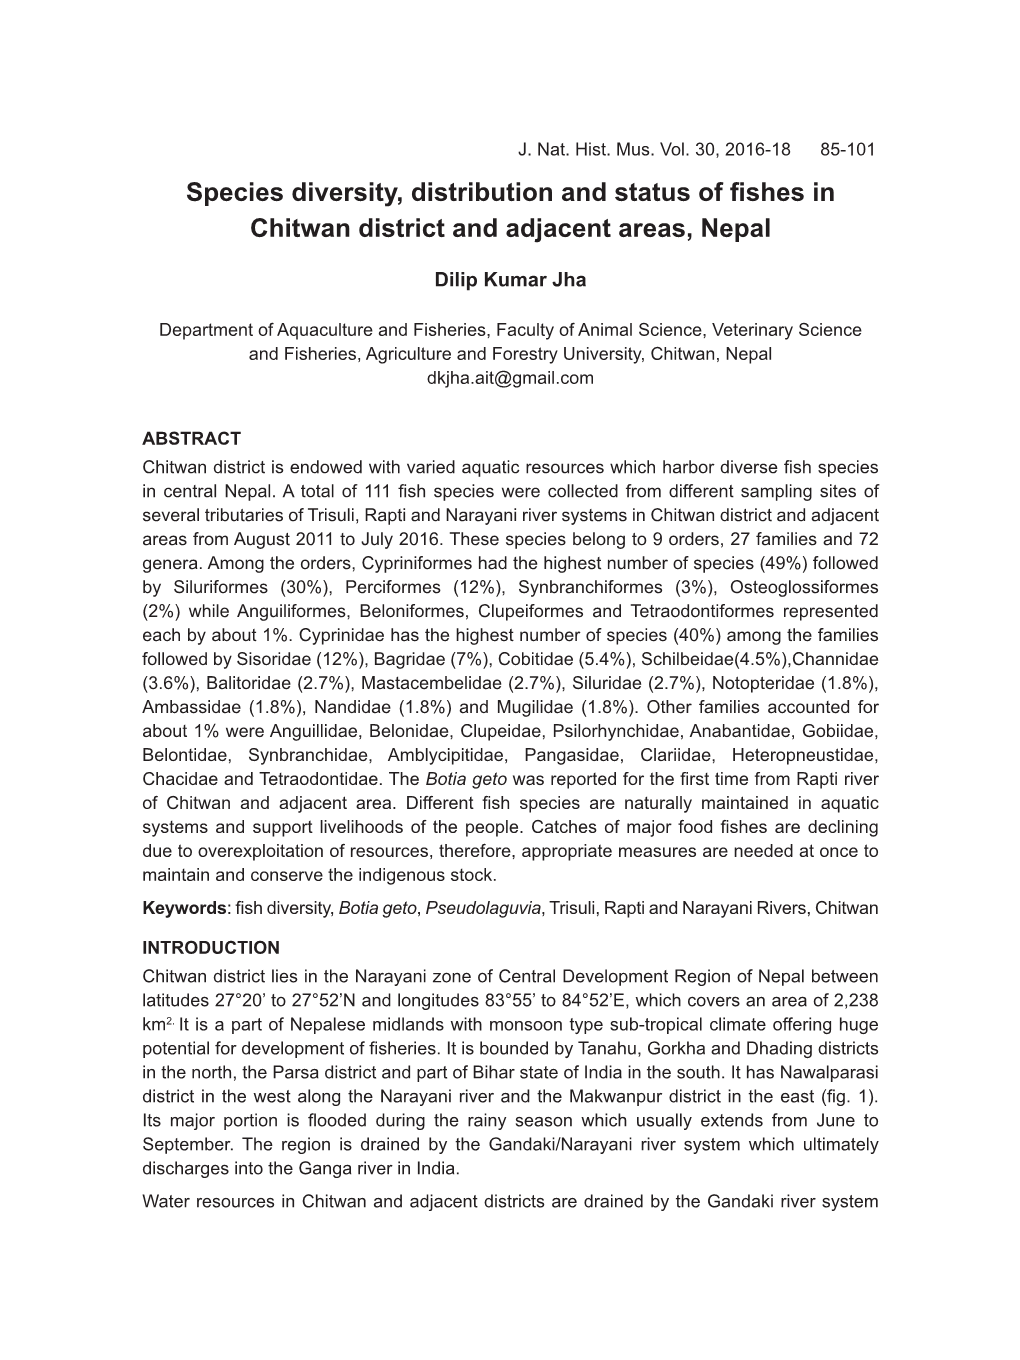 Species Diversity, Distribution and Status of Fishes in Chitwan District and Adjacent Areas, Nepal